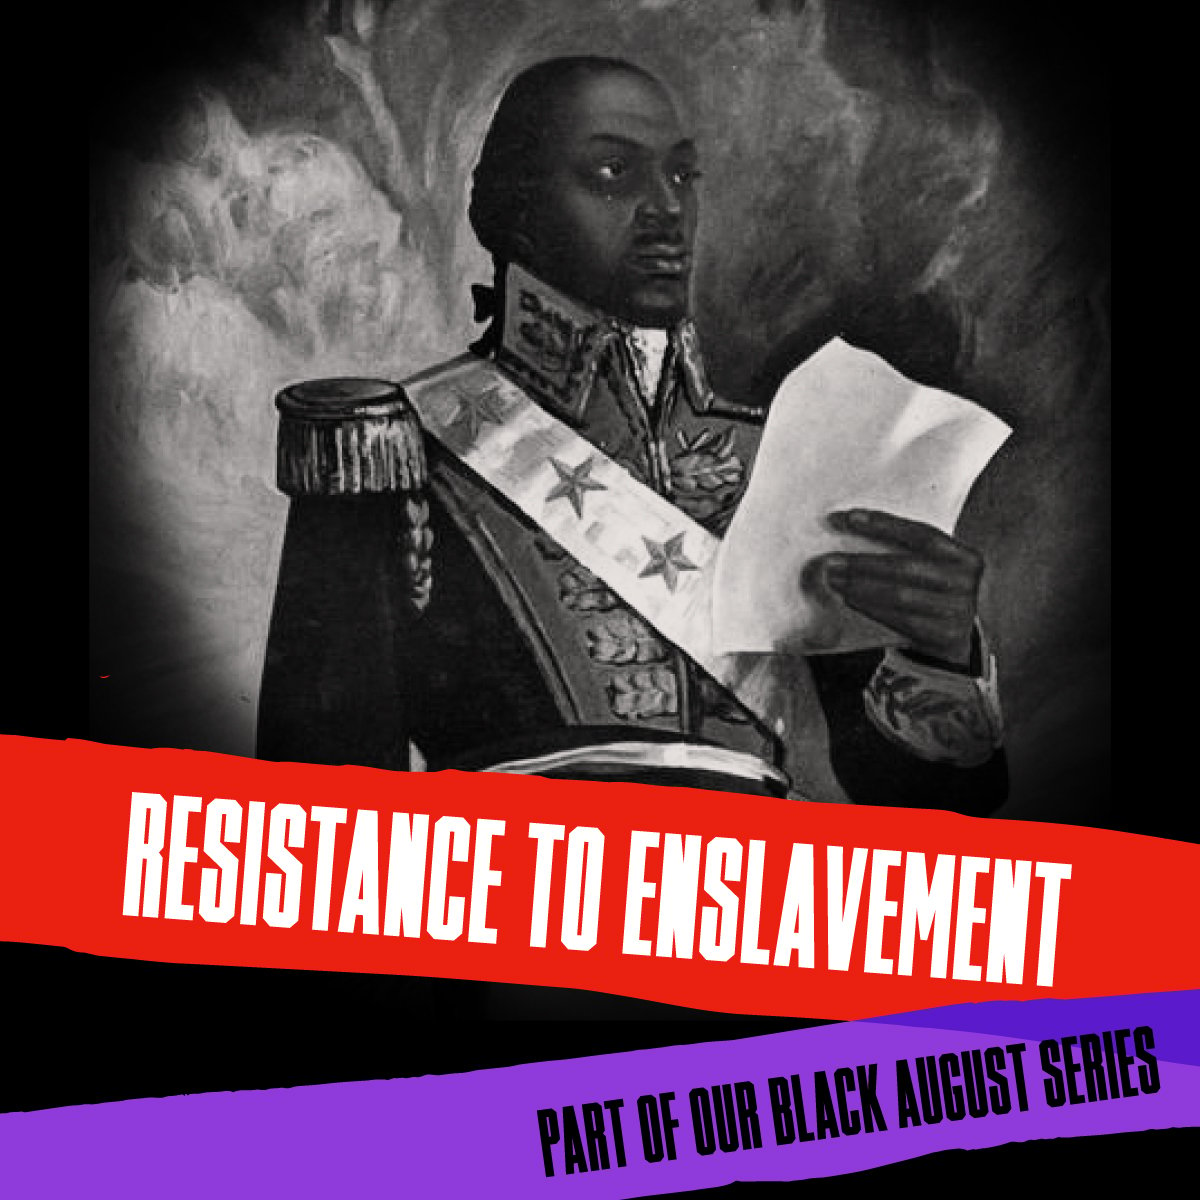 General Toussaint Louverture, leader of the Haitian Revolution, with the text 'Resistance to Enslavement' and 'Part of our Black August Series.''
